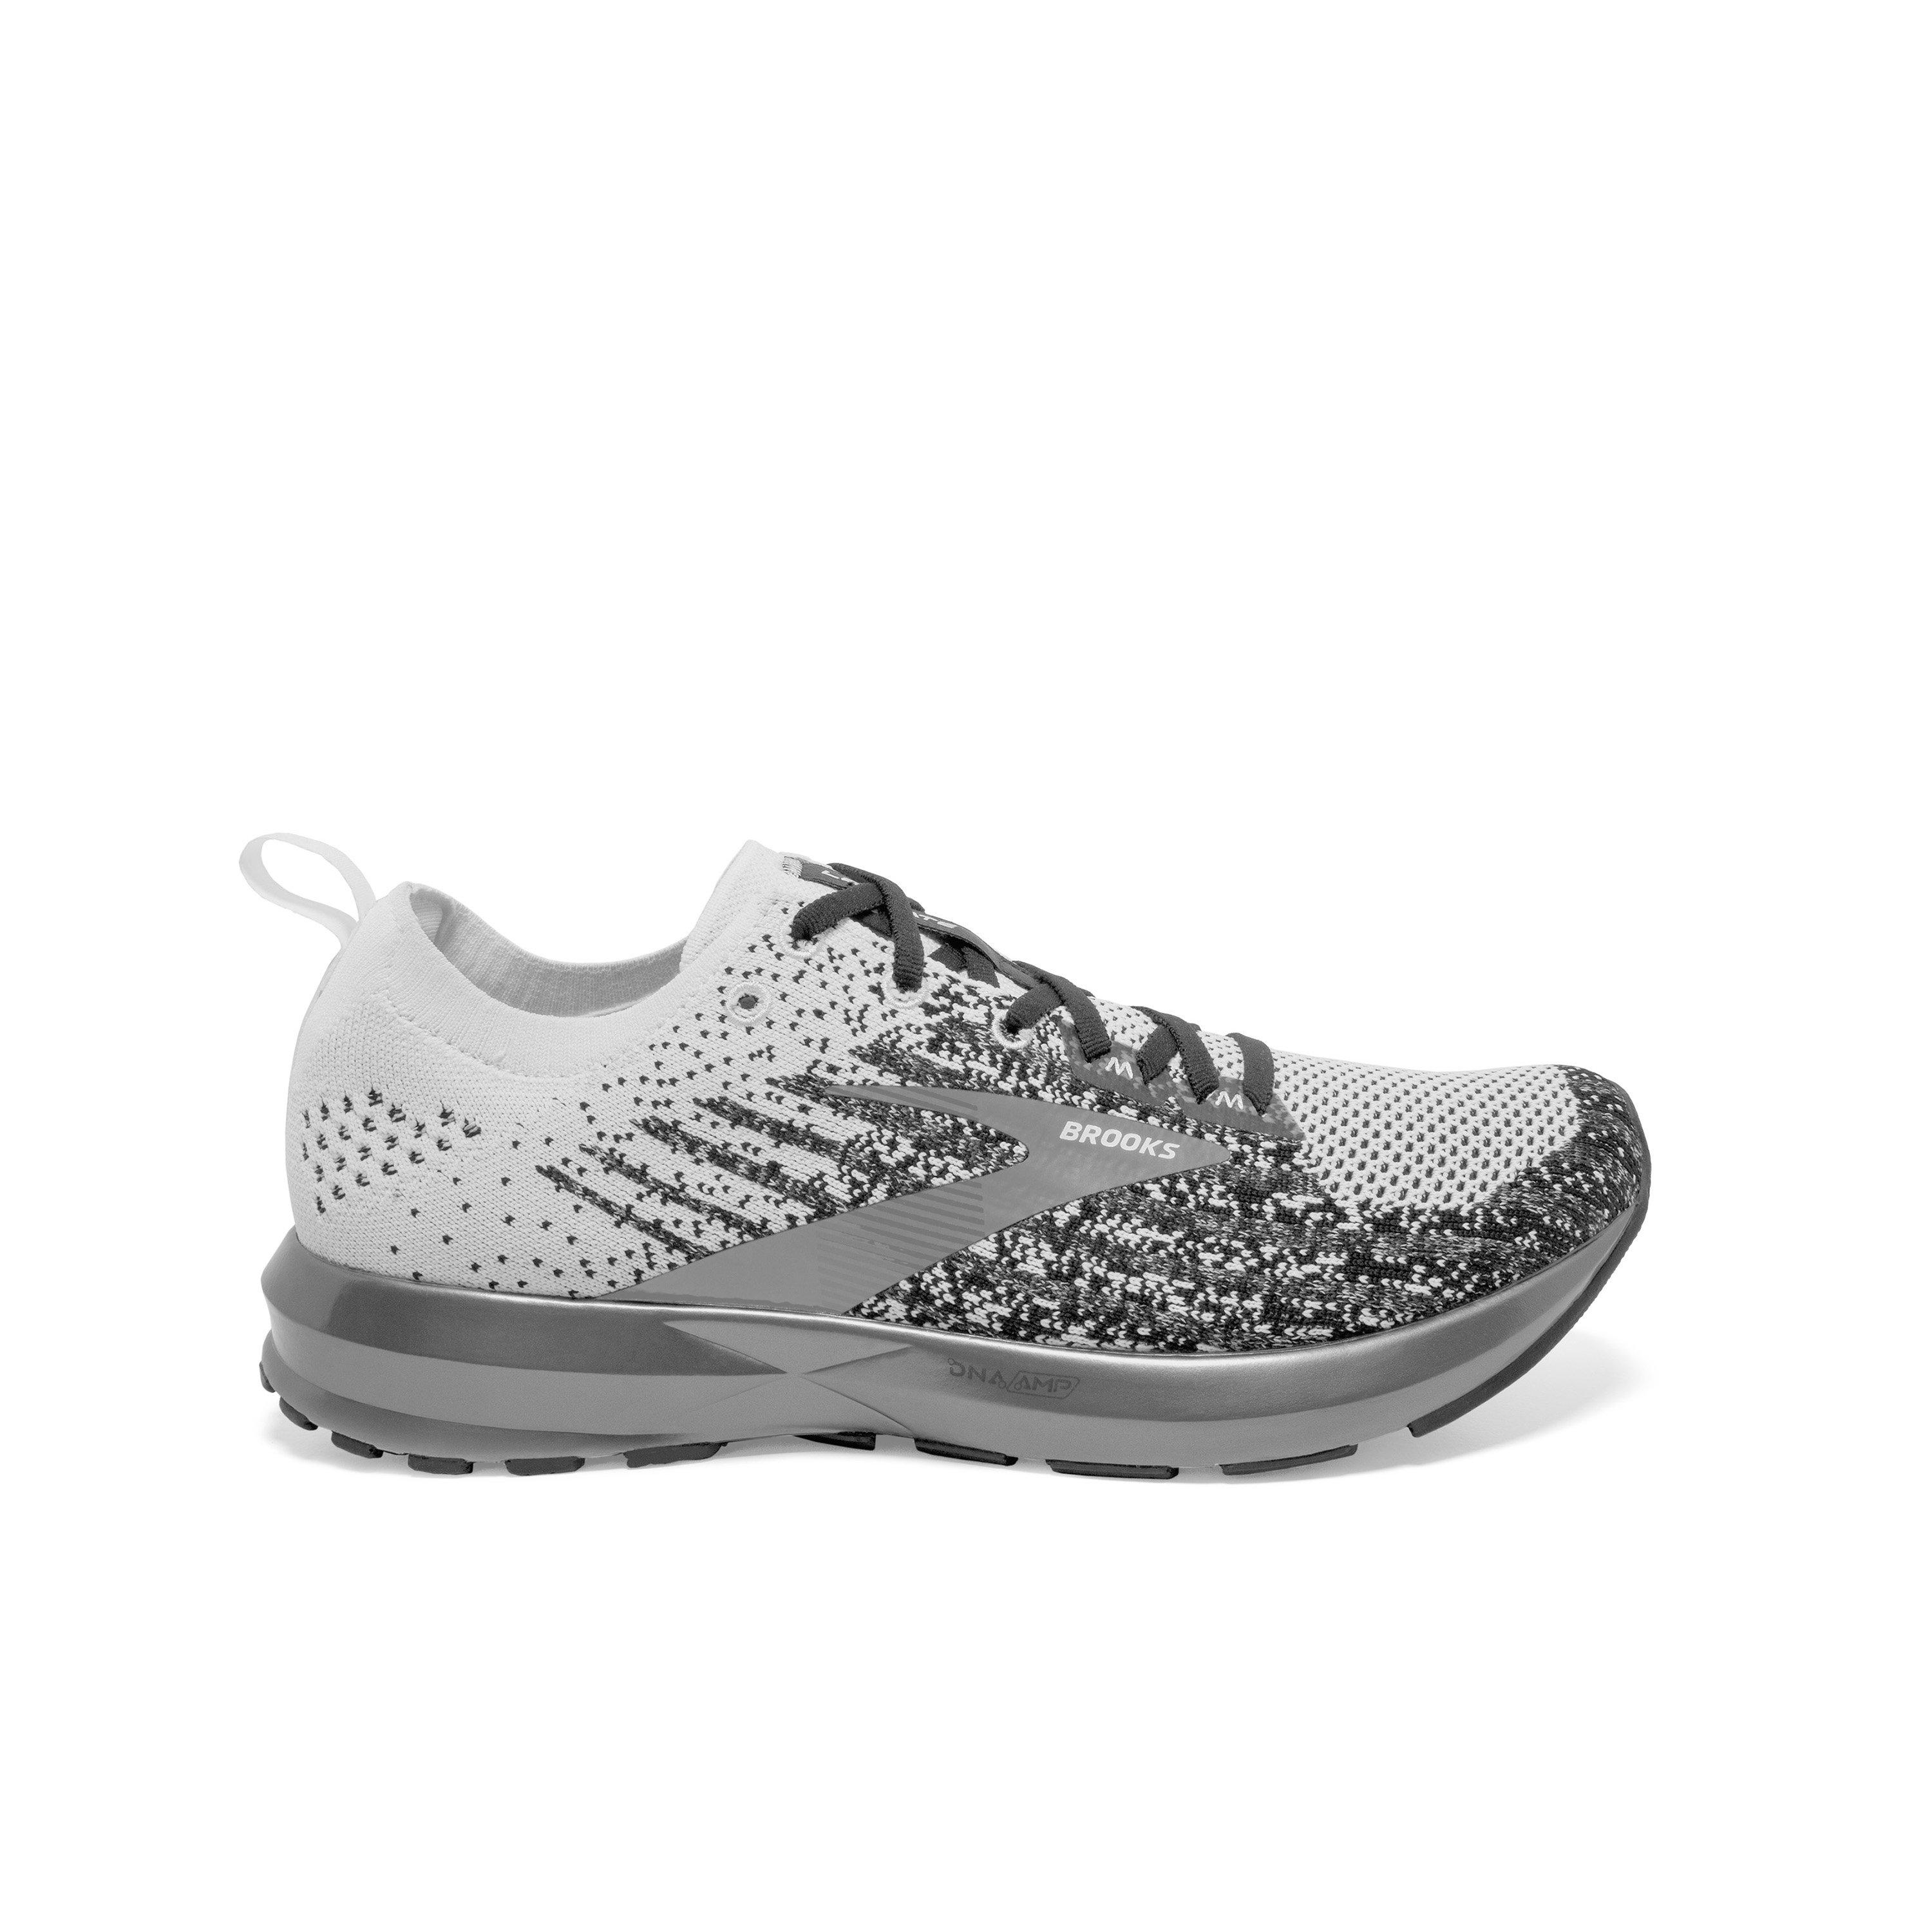 brooks running shoes clearance womens